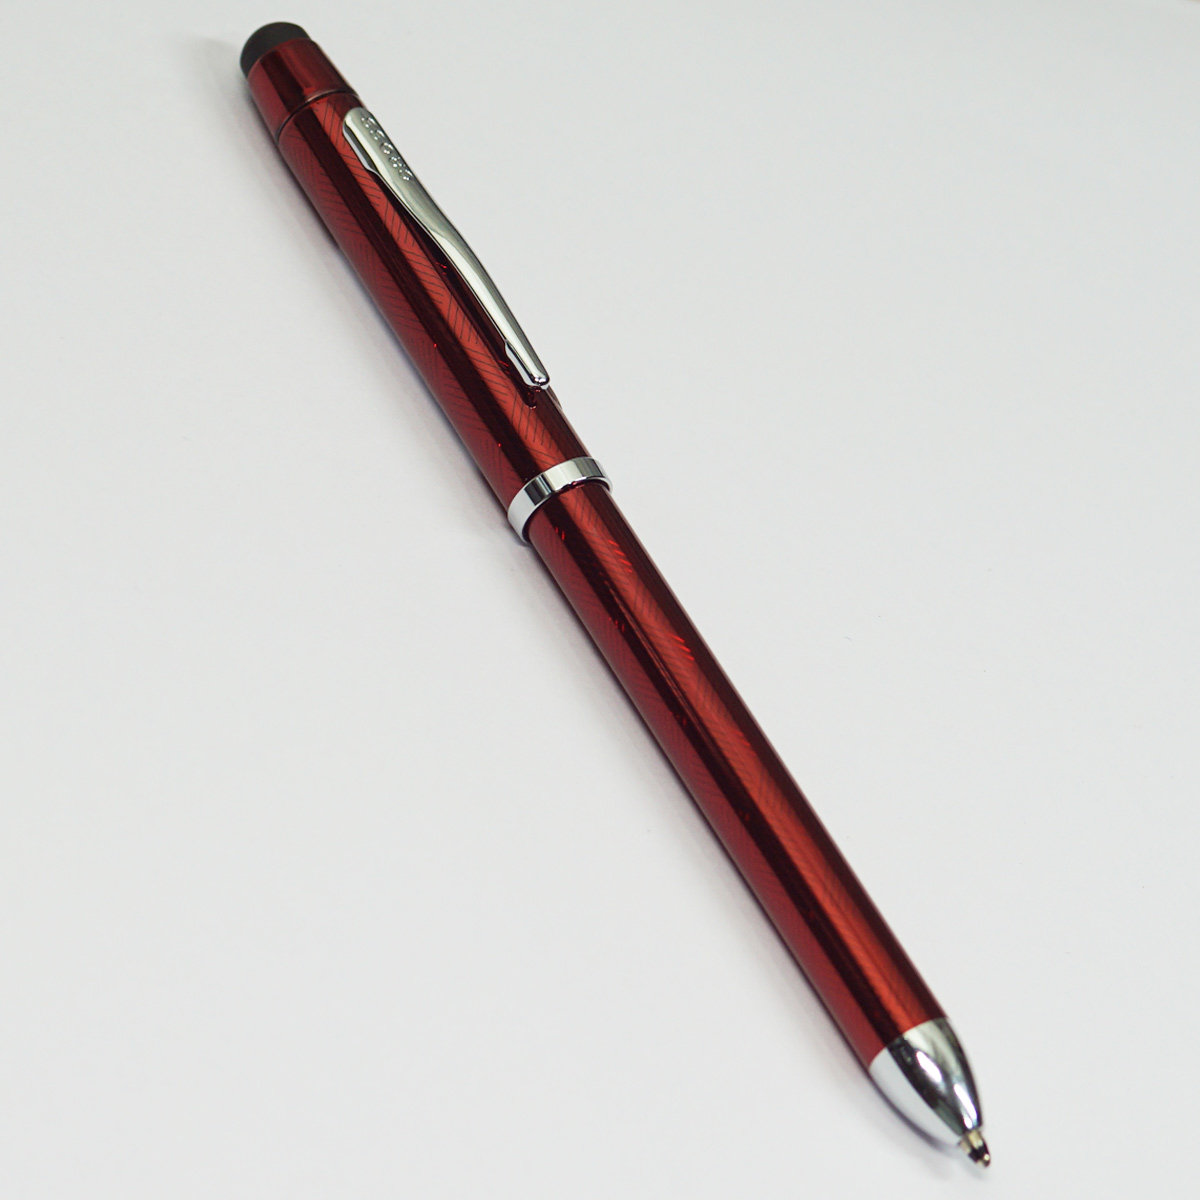 Cross Tech 3 Red Color Body With Medium Tip Black And Red Writing With 0.5 Lead Pencil With Stylus On Top Silver Trims Twist Type Mutifuntional Ball Pen  SKU 23397